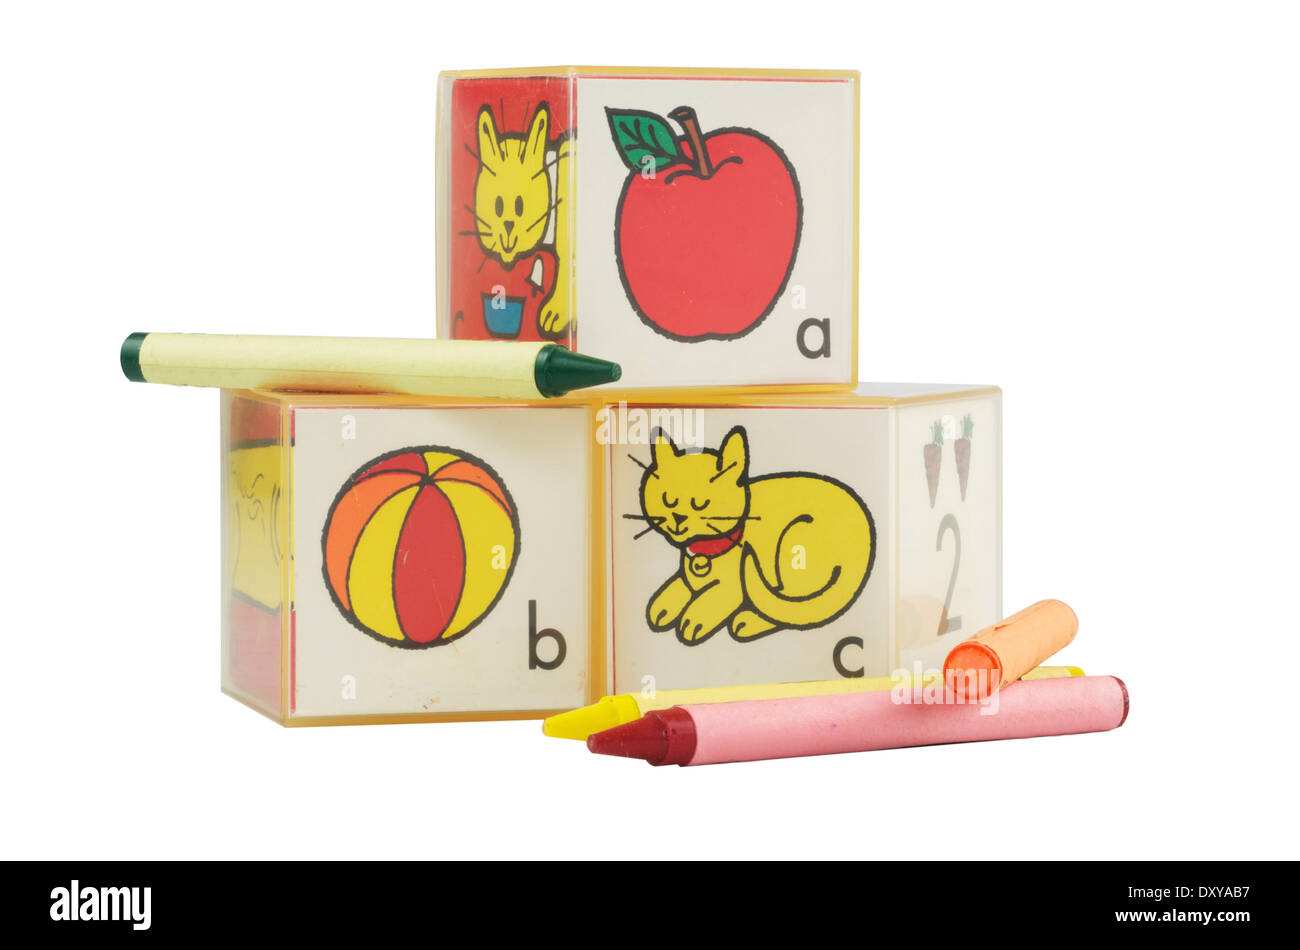 Preschool plastic learning blocks,ABC's with crayons. Stock Photo